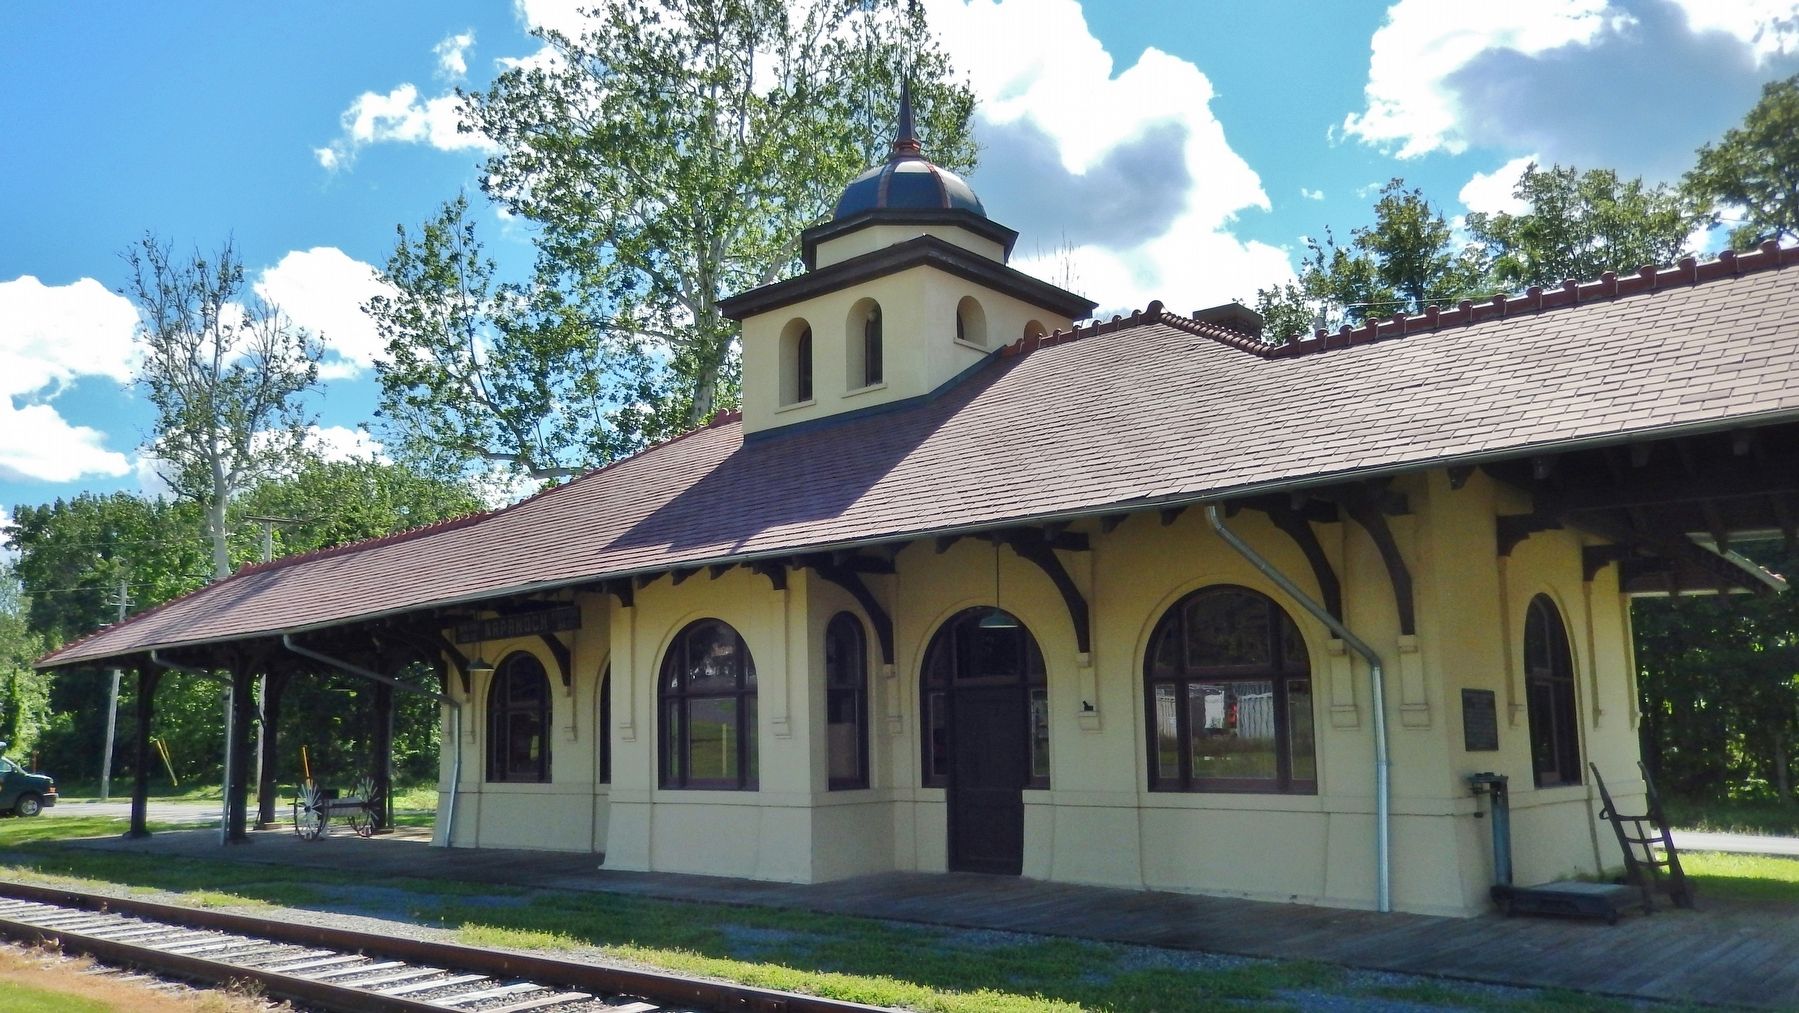 Napanoch Station (<i>east side view</i>) image. Click for full size.